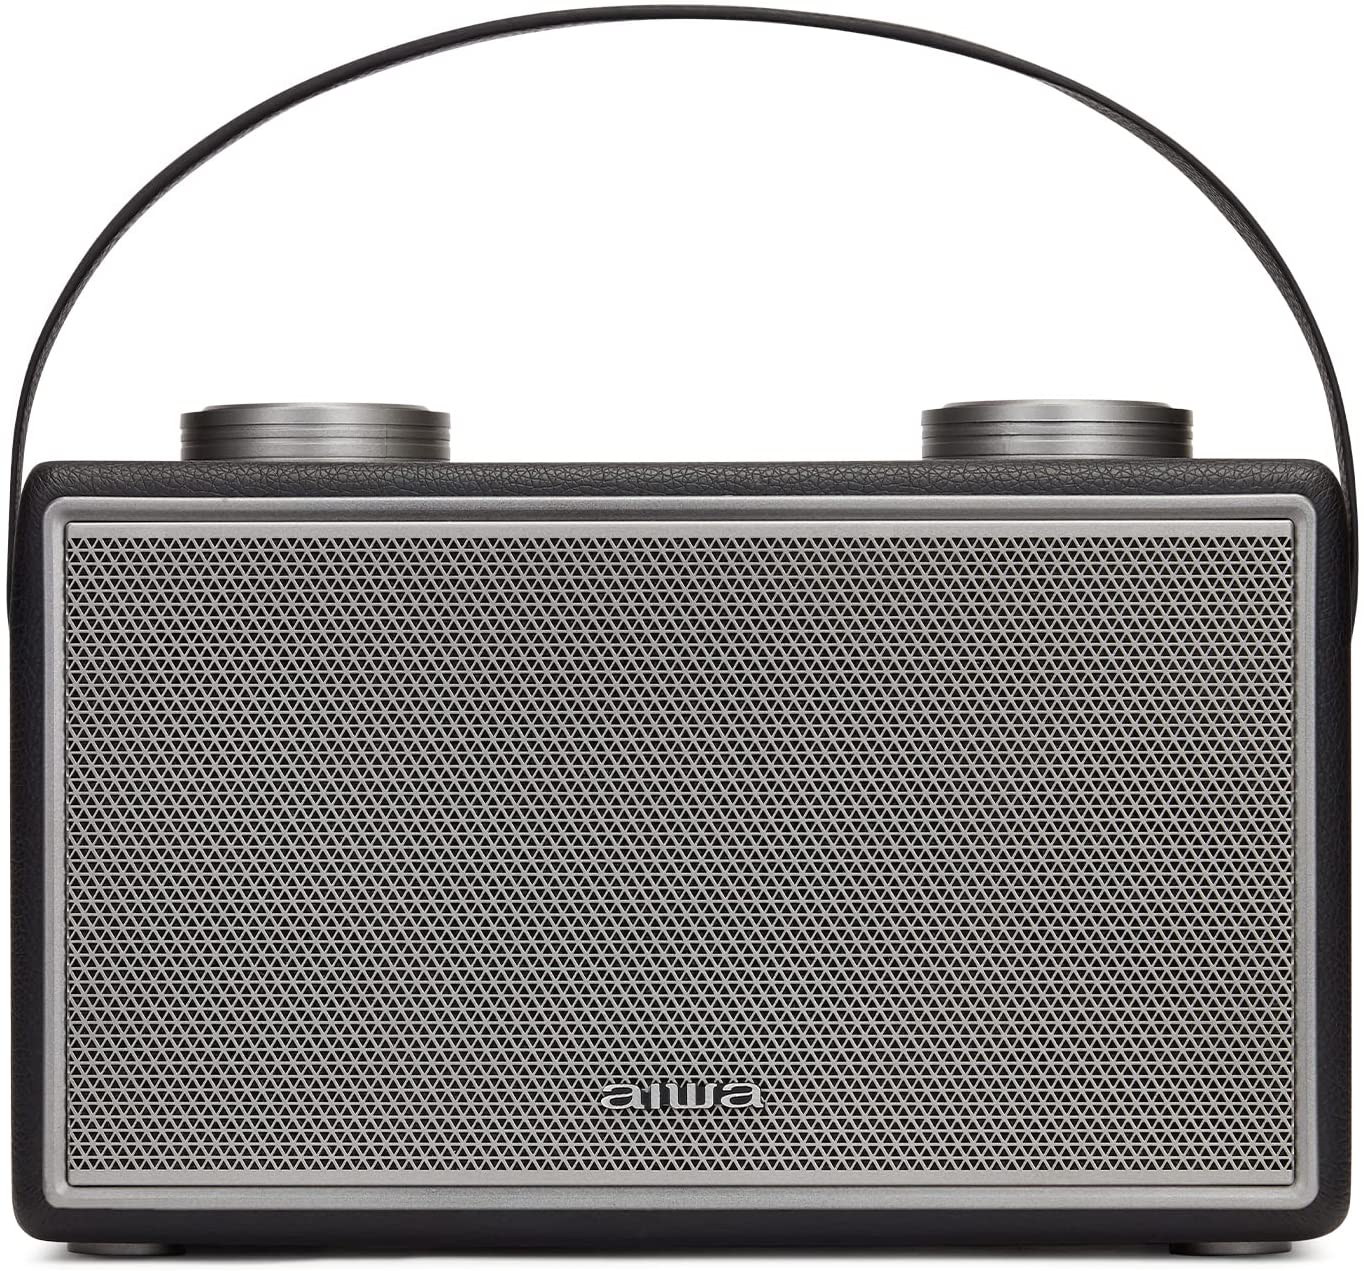 Aiwa BSTU-800BK Vintage Style Wireless Compact Speaker with Mic & Guitar Input from MagicVision